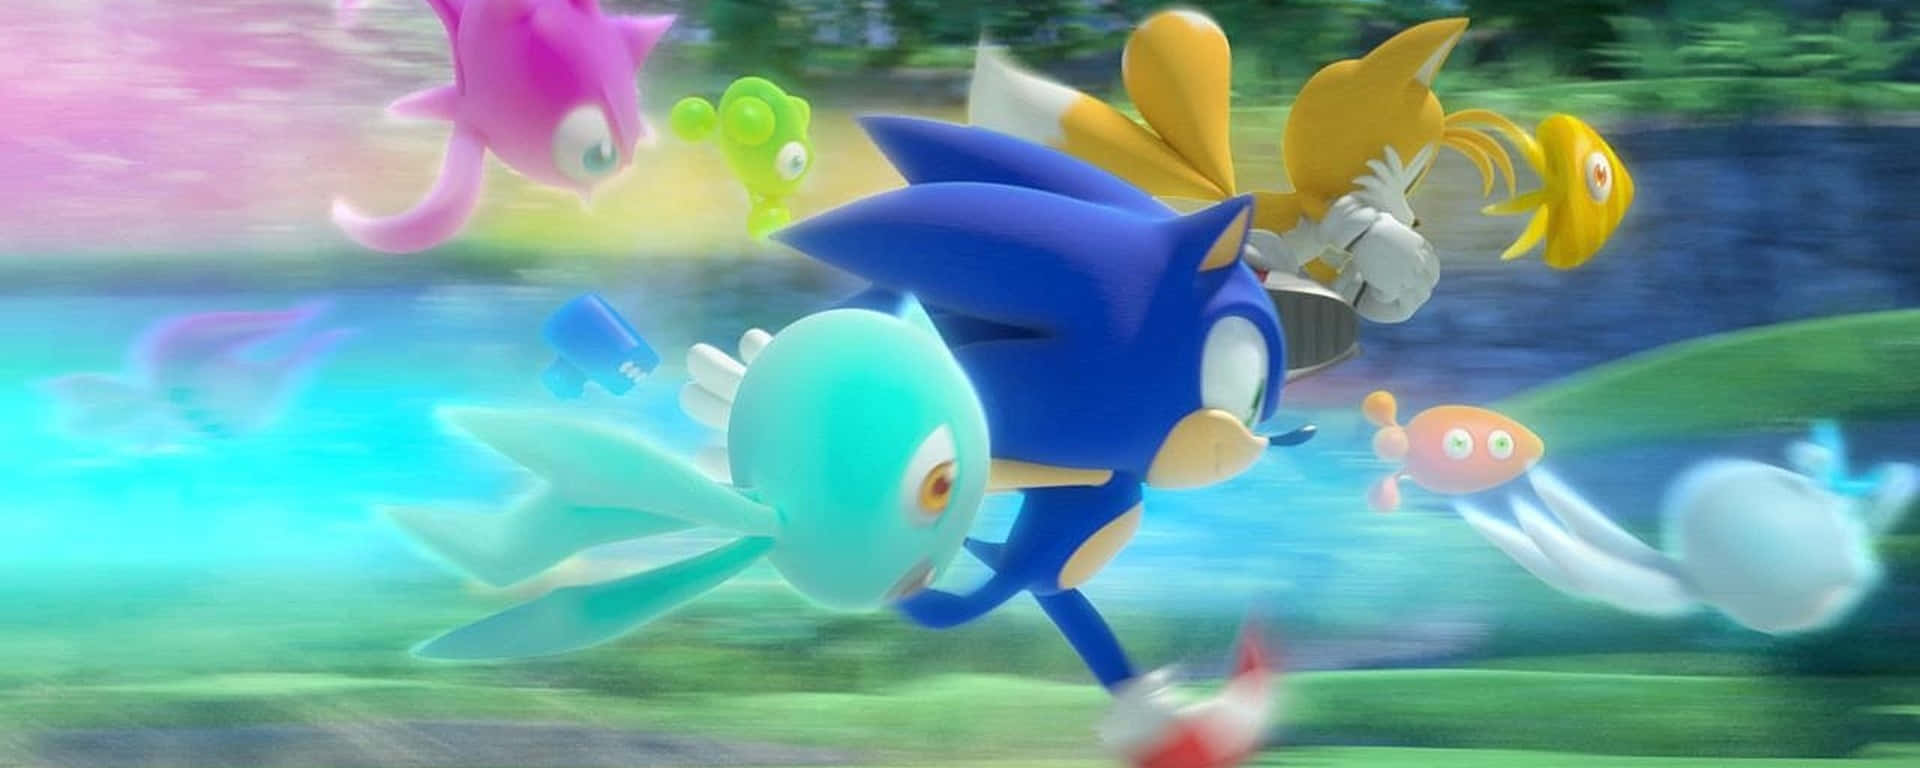 Sonic The Hedgehog And His Friends Are Running In The Grass Wallpaper